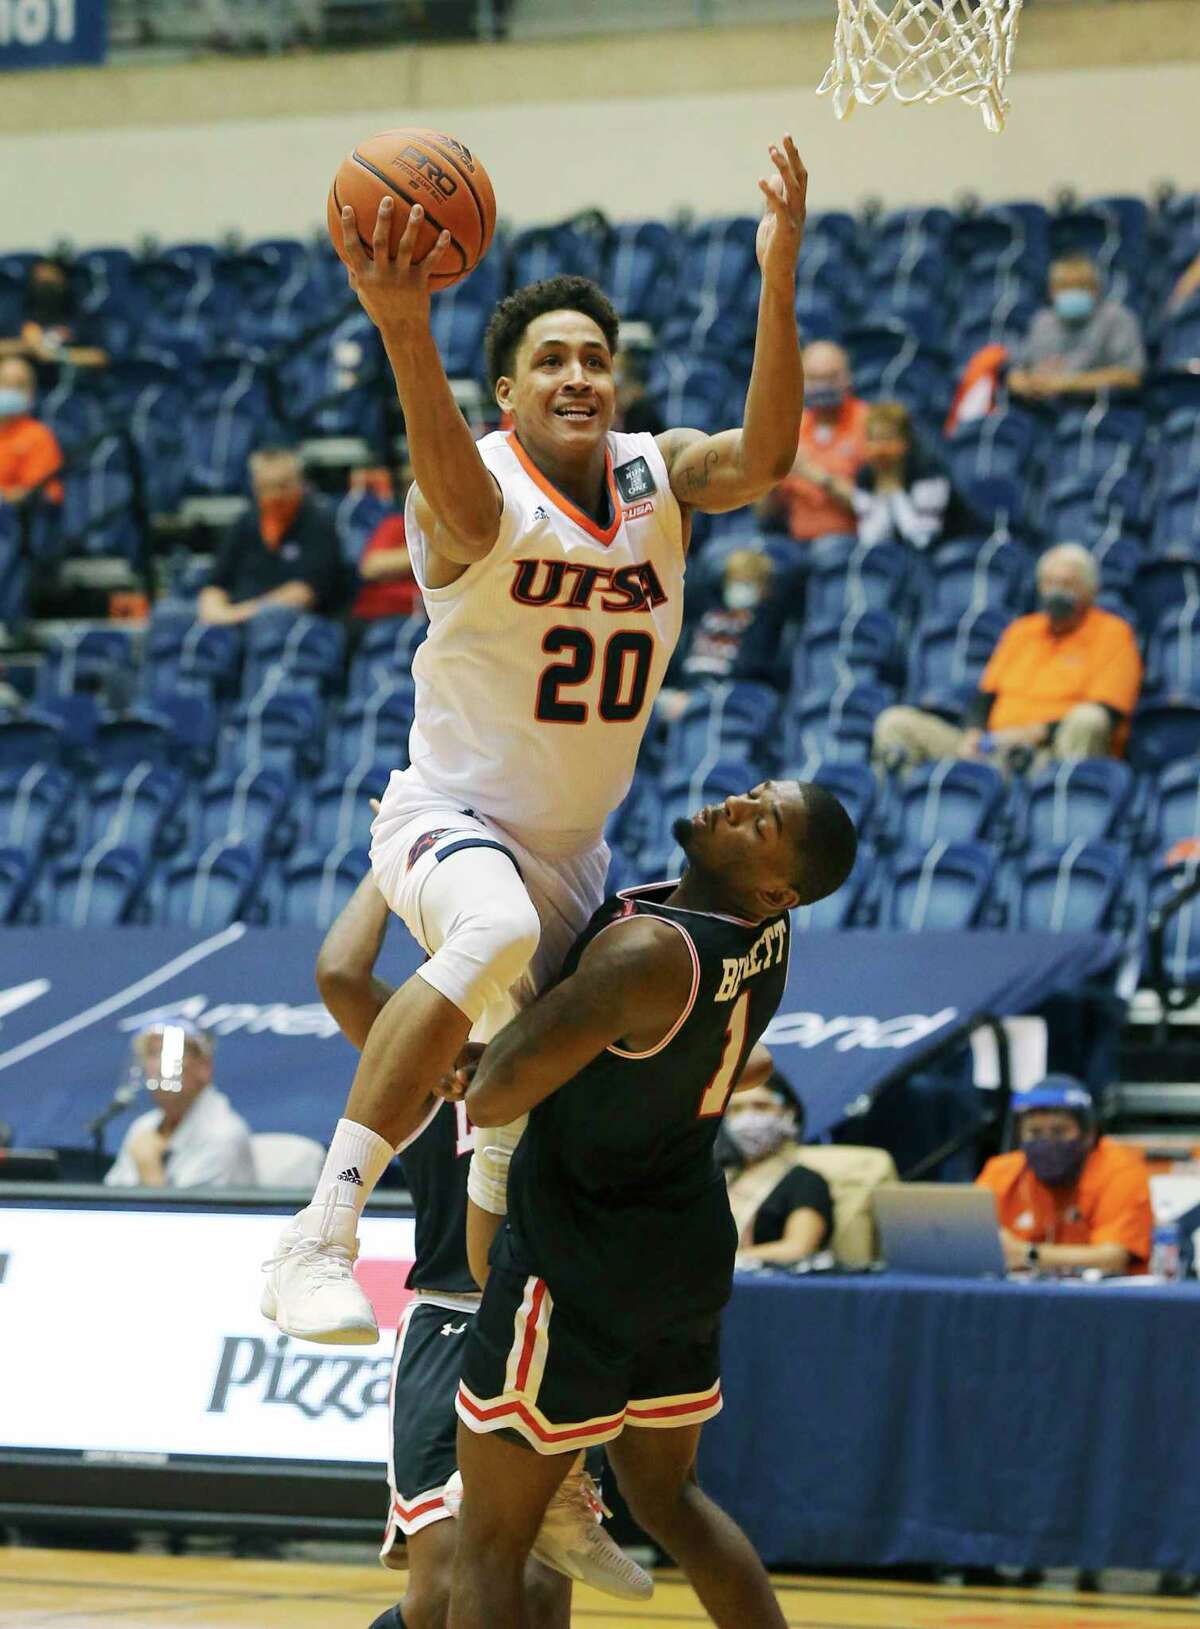 UTSA's Eric Parrish (20) gets called for a charge against Lamar's Quinlan Bennett (01) during their basketball game at UTSA on Tuesday, Dec. 22, 2020.